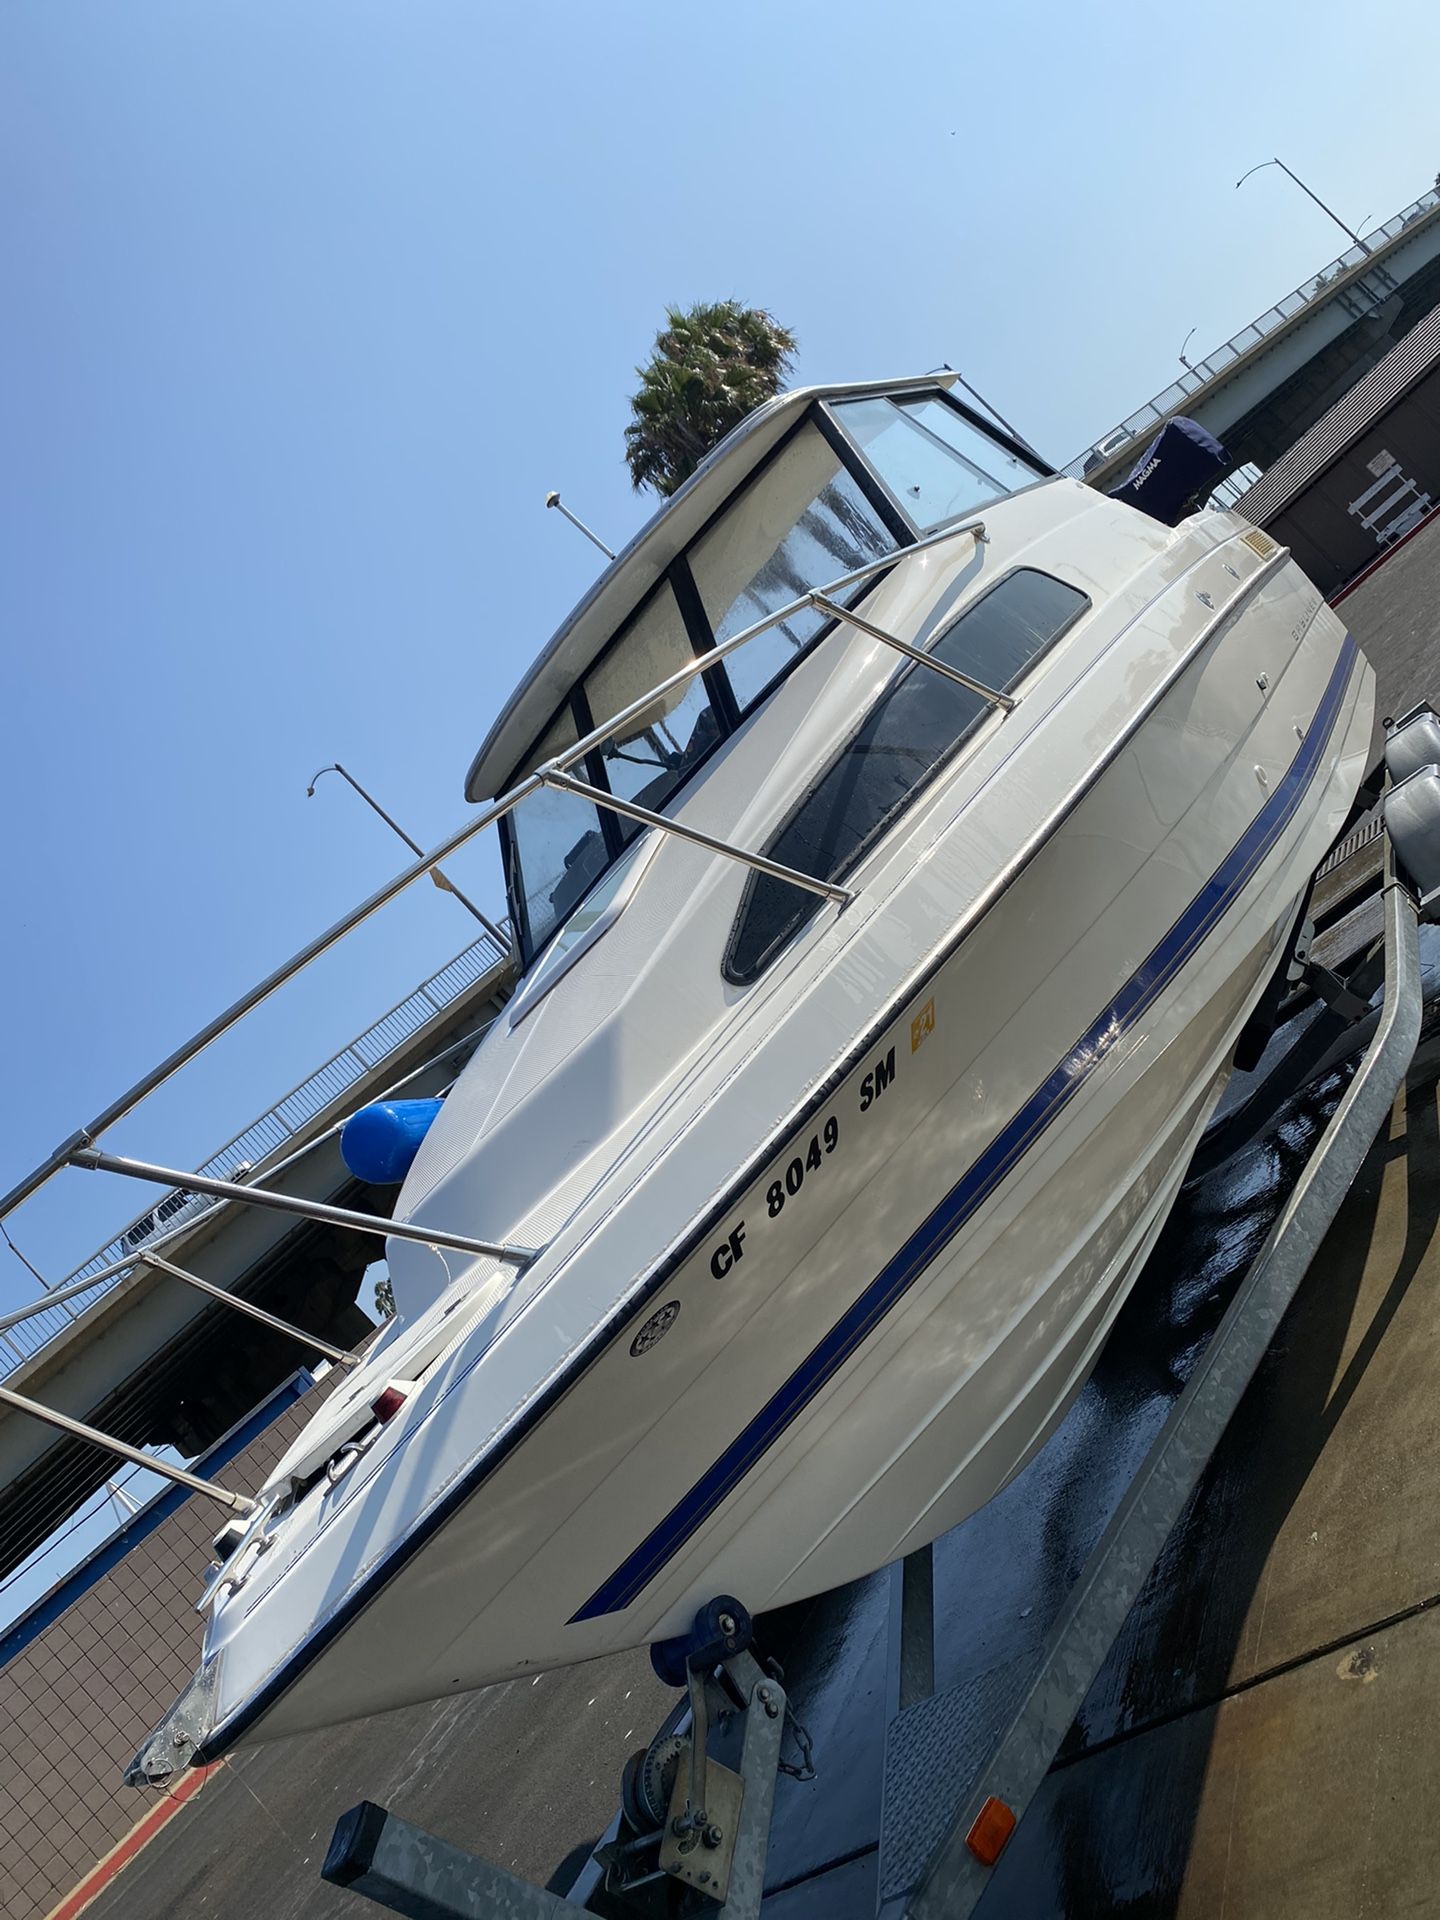 2006 23ft Flawless Bayliner Classic Cruiser Hard Top 40 Hrs!!! Best Boat Here